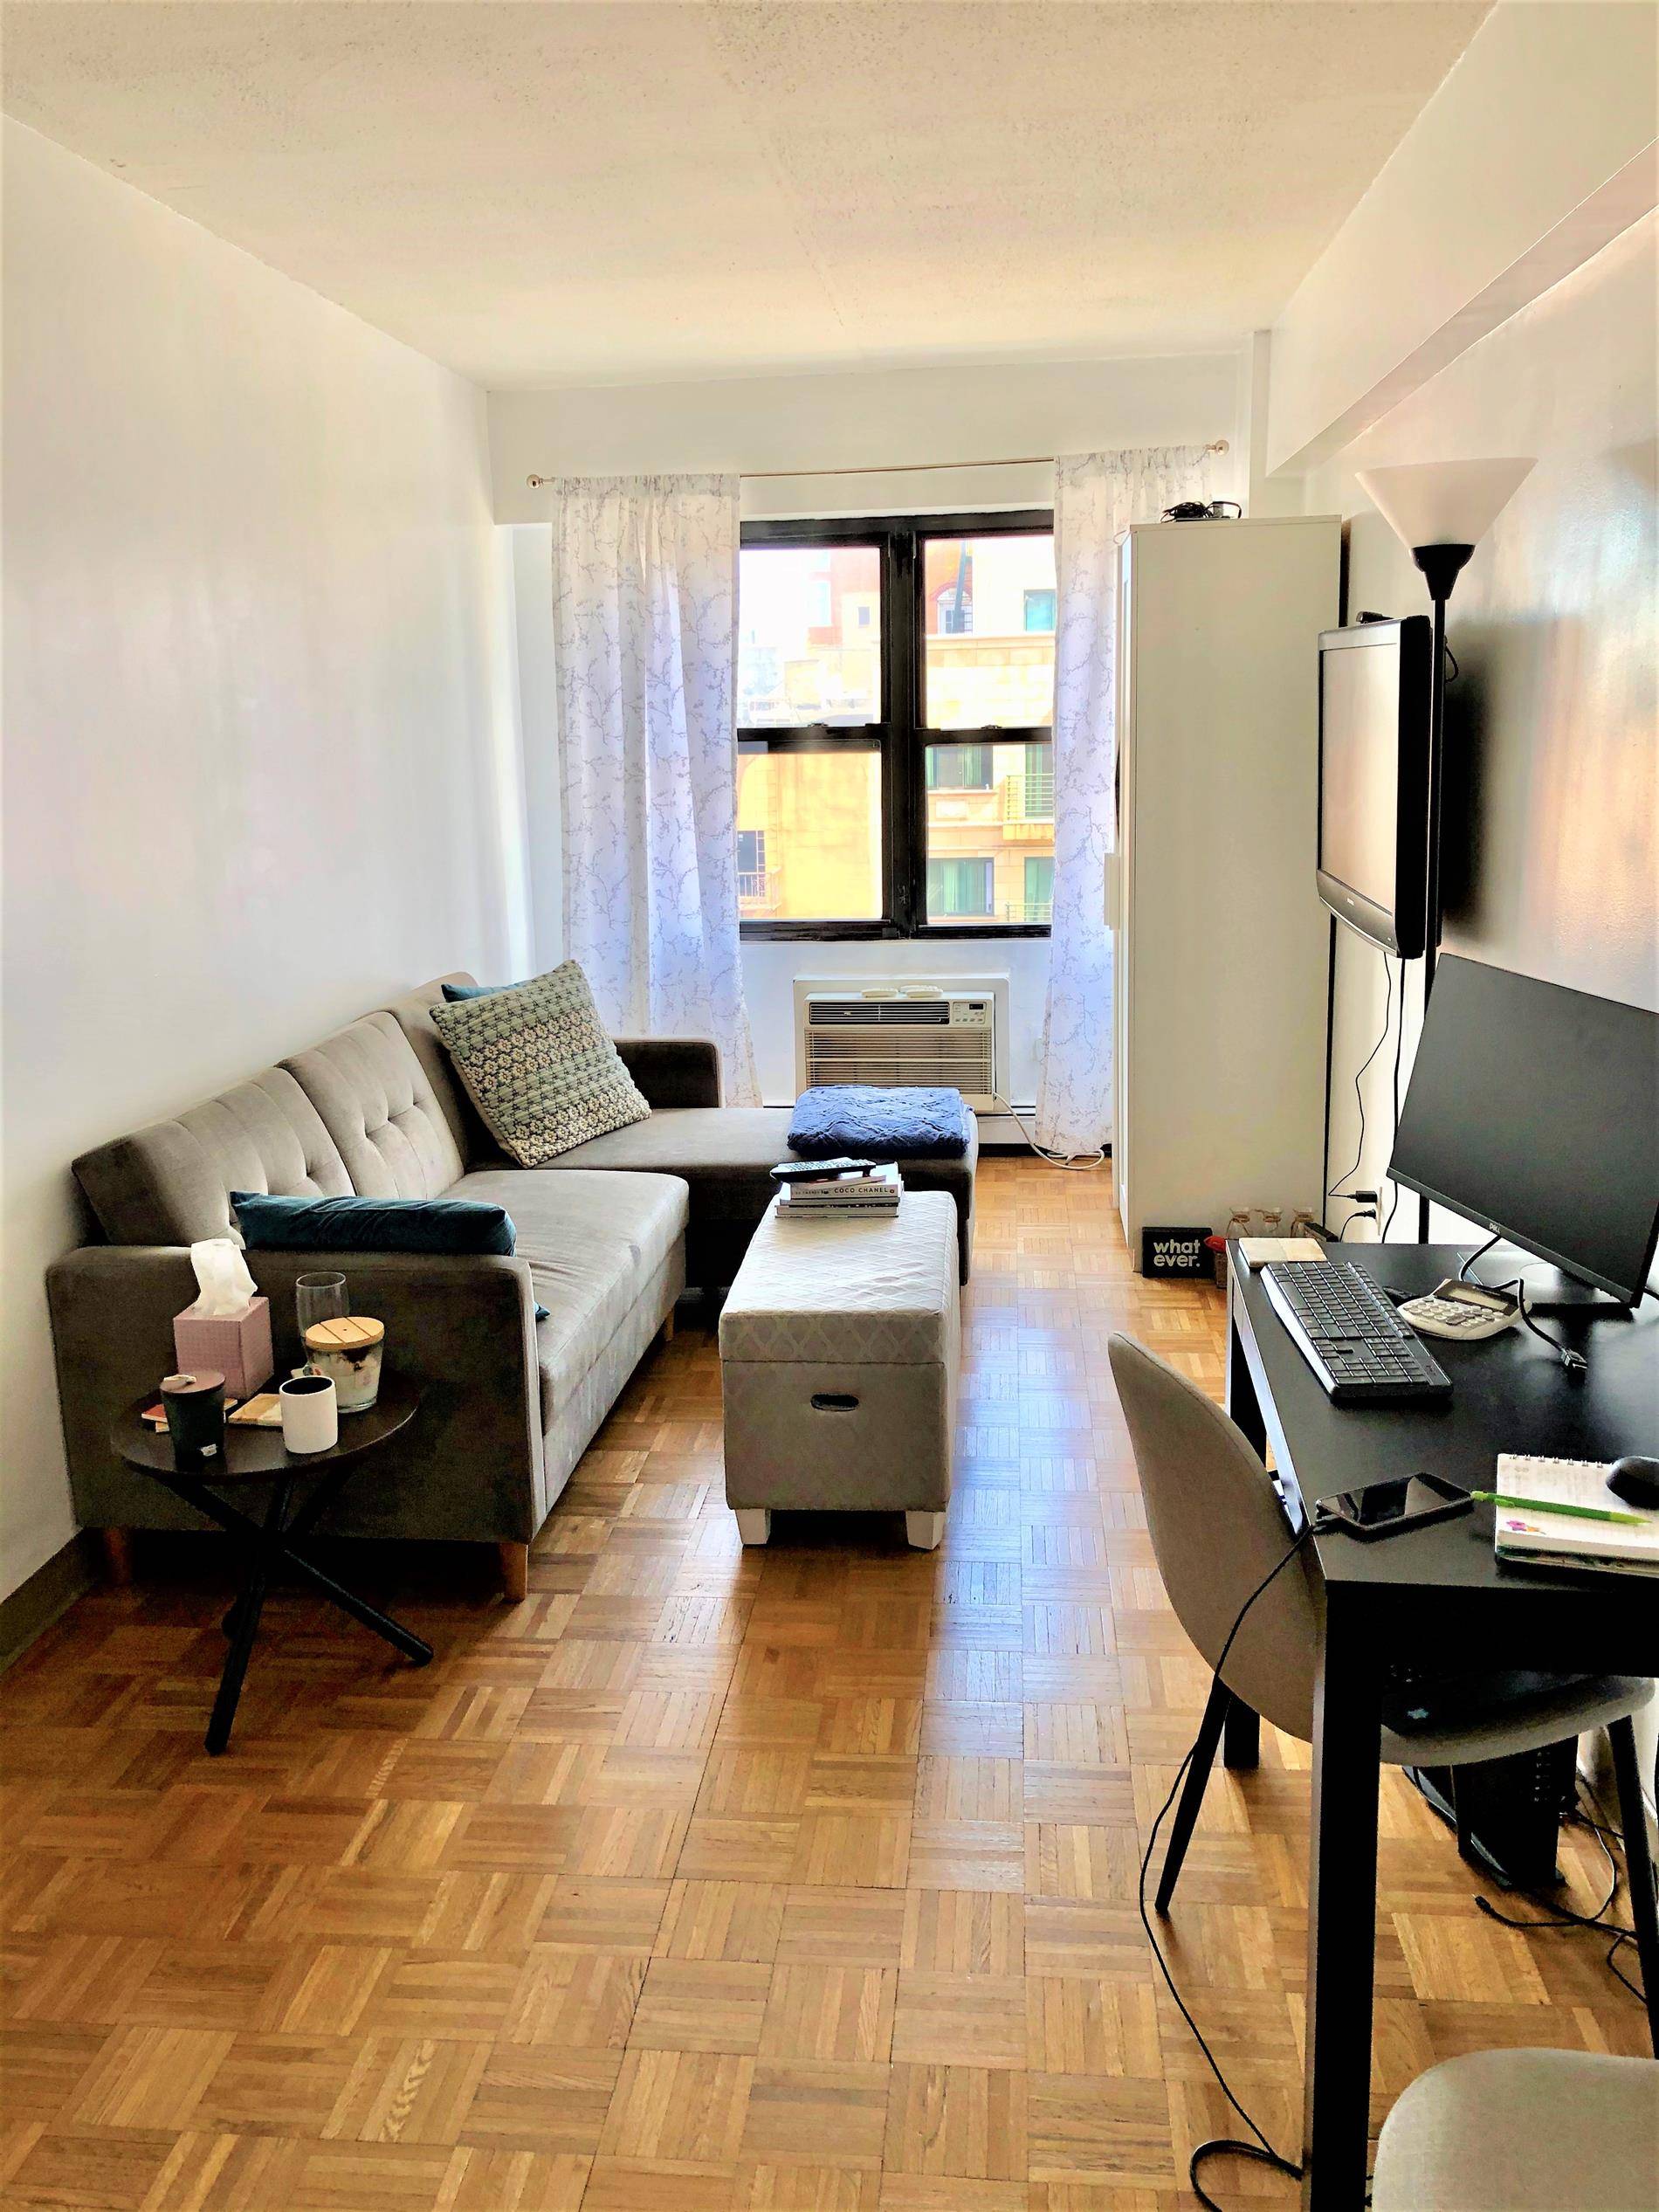 Nestled in the crossroads of Nolita Little Italy Chinatown area and is central to SoHo, Tribeca and Lower East Side right across from the New Museum and steps away from ...